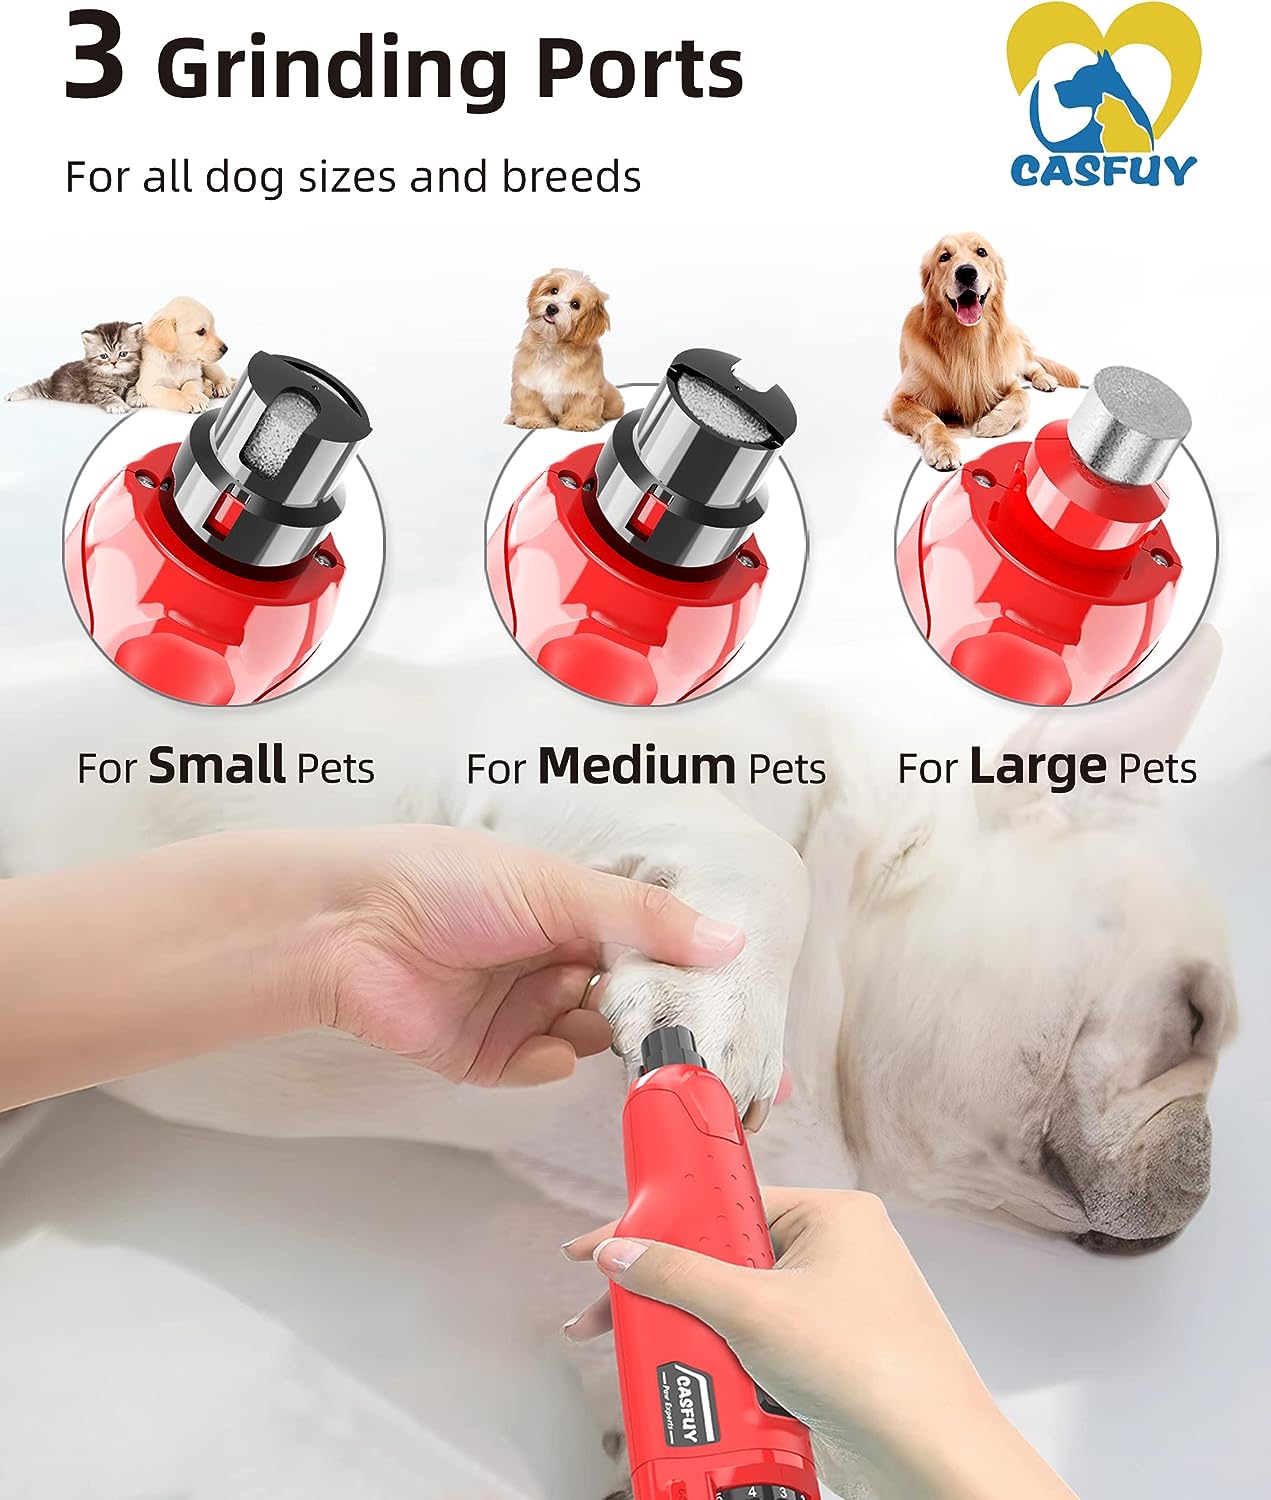 Casfuy Dog Nail Grinder Quiet - (45db) 6-Speed Pet Nail Grinder with 2 LED Lights for Large Medium Small Dogs/Cats, Professional 3 Ports Rechargeable Electric Dog Nail Trimmer with Dust Cap